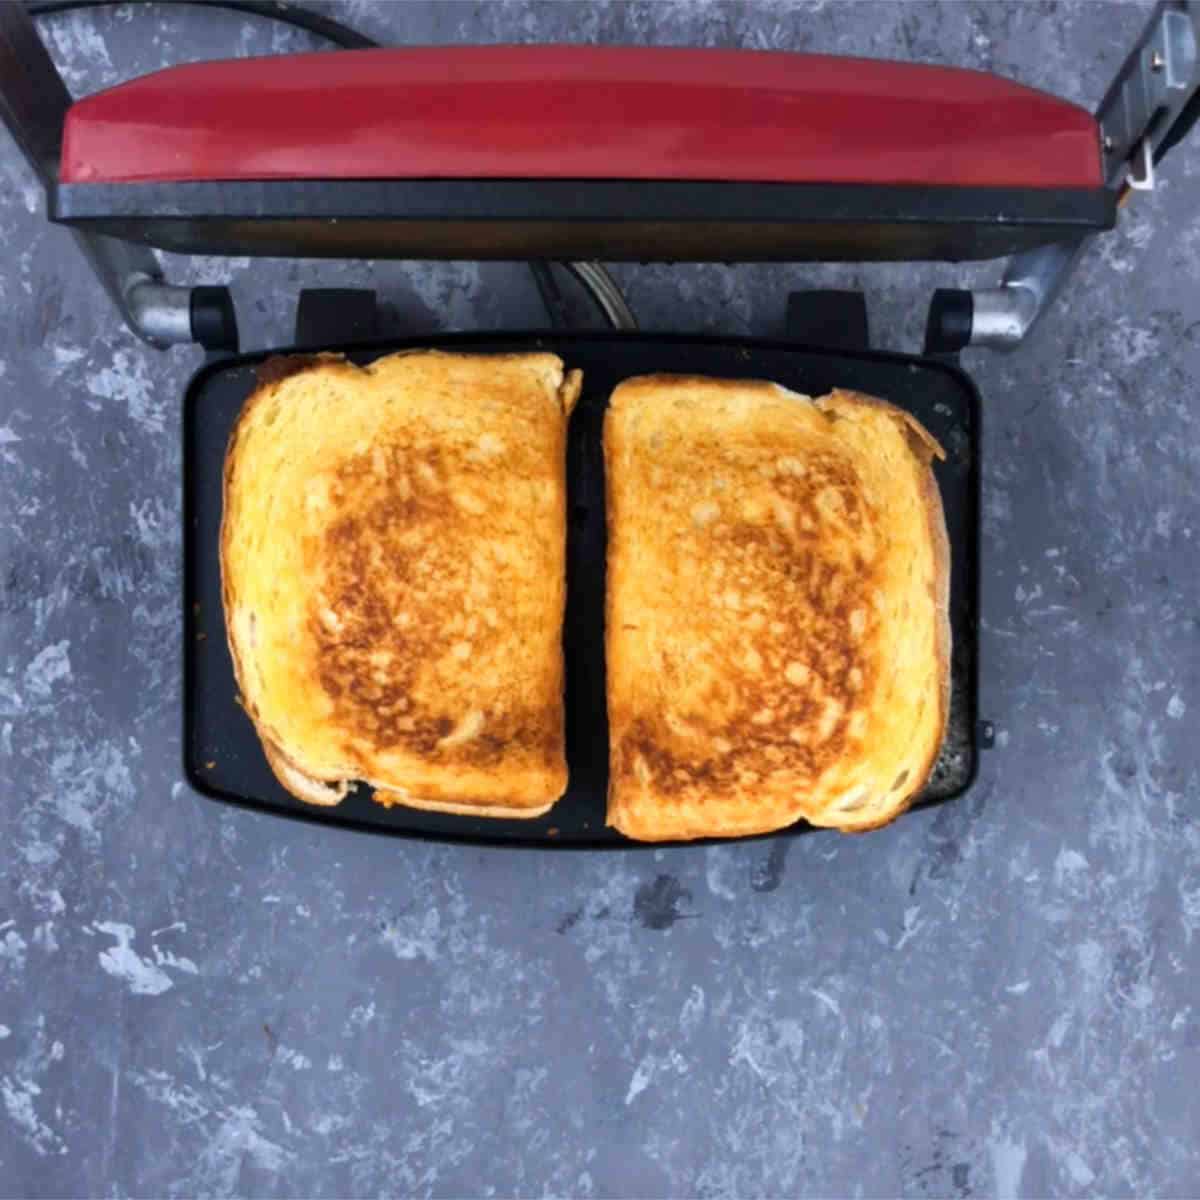 Grill the sandwich in a panini press till golden.